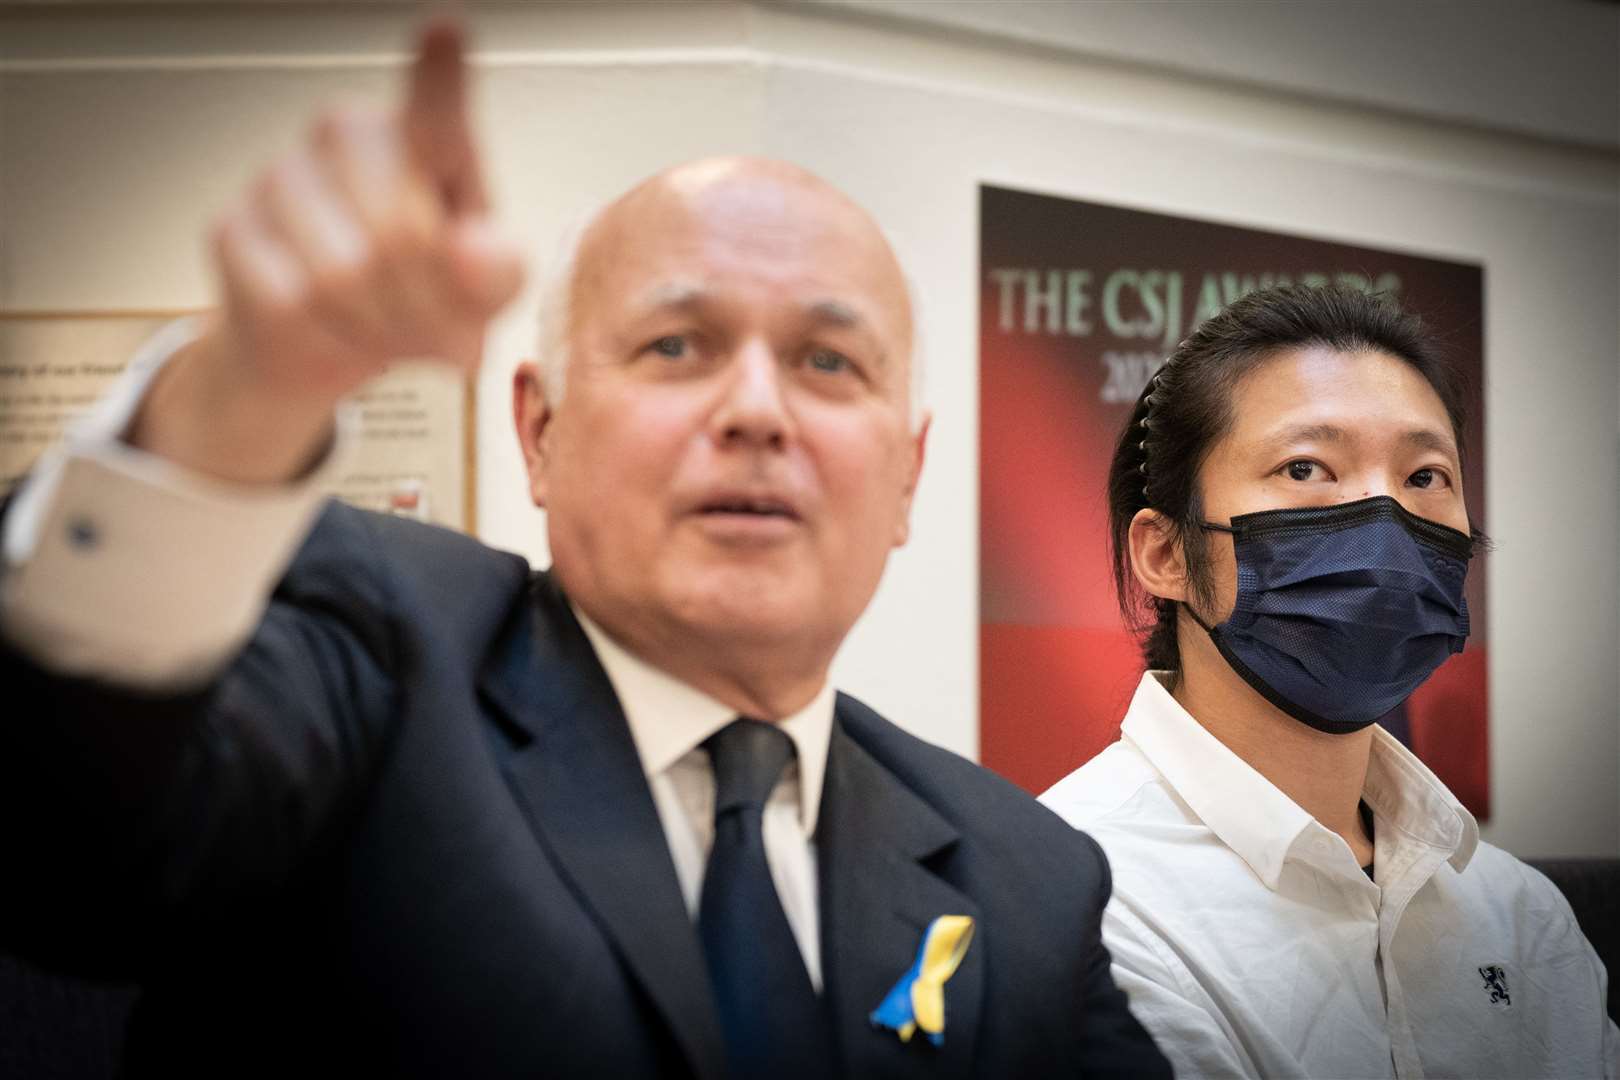 Bob Chan (right), the Hong Kong protester allegedly assaulted at the Chinese consulate in Manchester, with Conservative MP Iain Duncan Smith at a press conference in central London (PA)